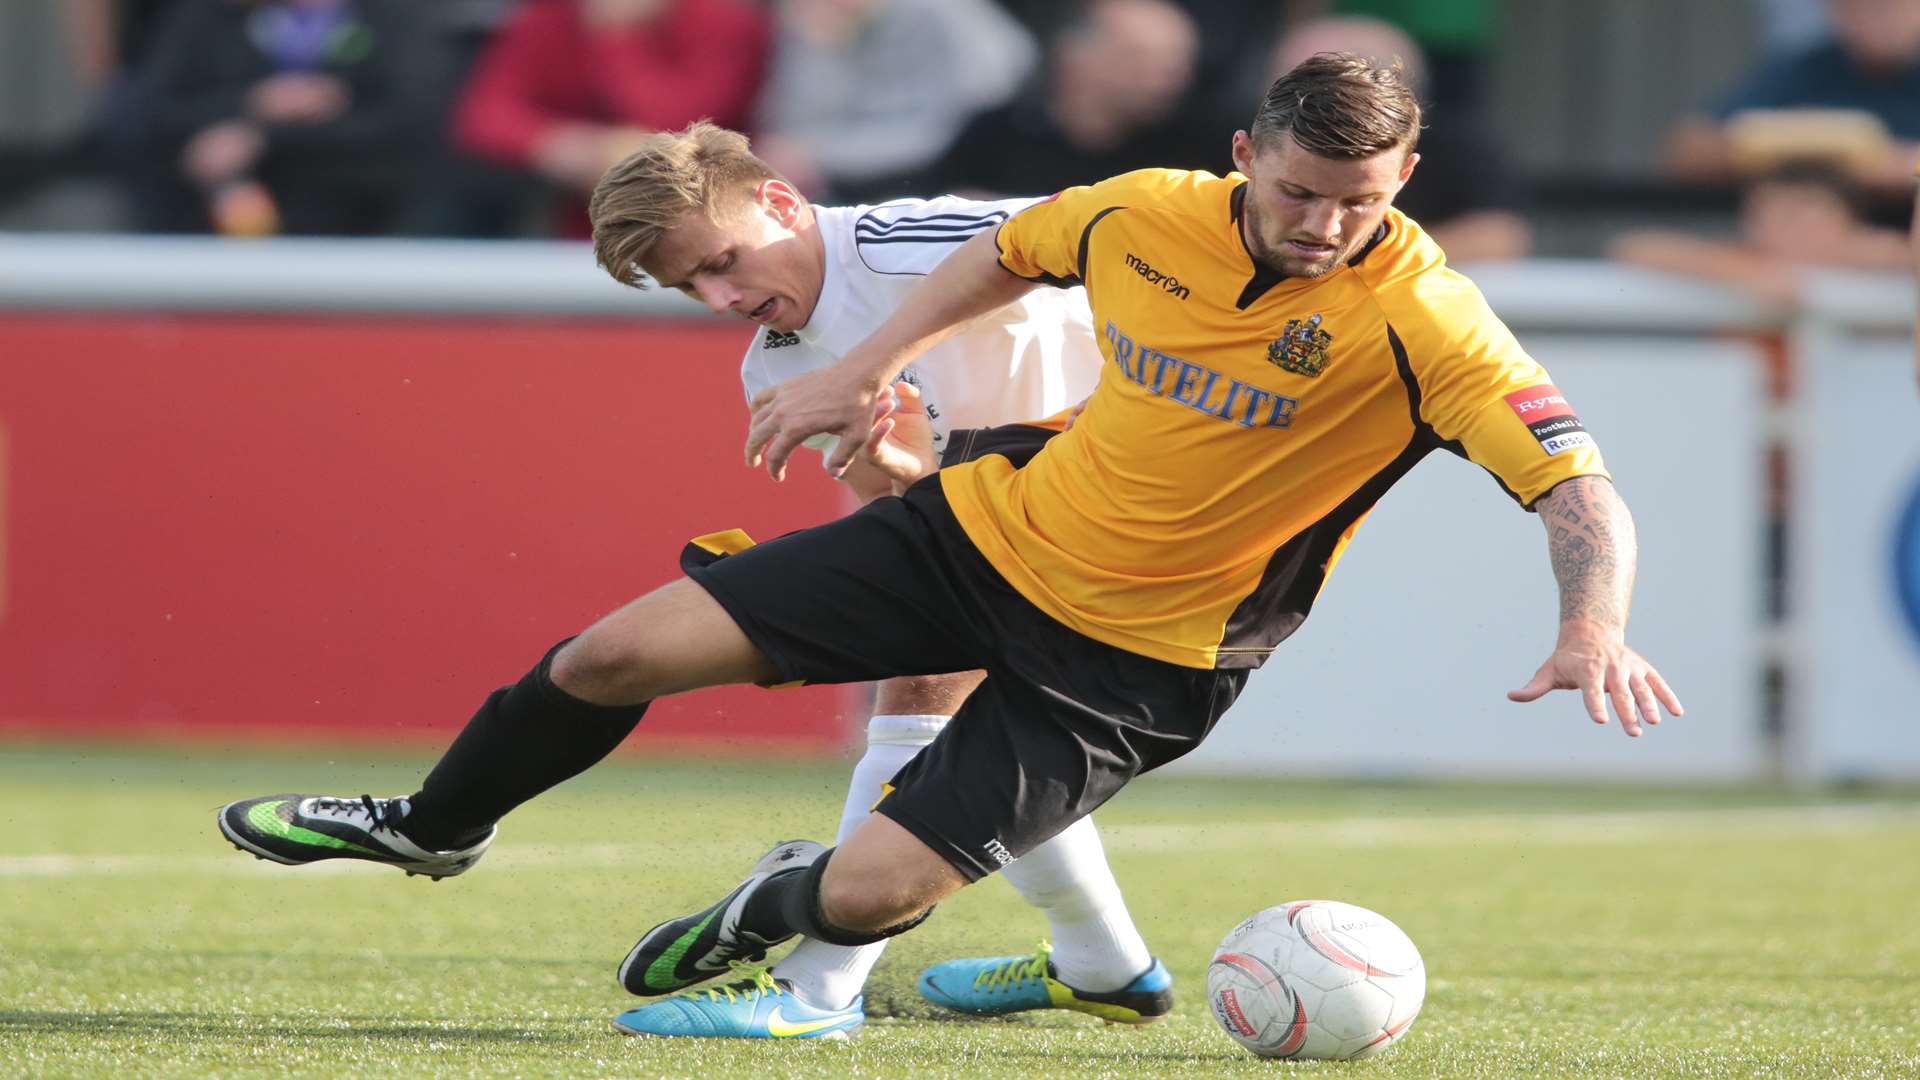 James Rogers helped Maidstone win the Ryman League last season Picture: Martin Apps